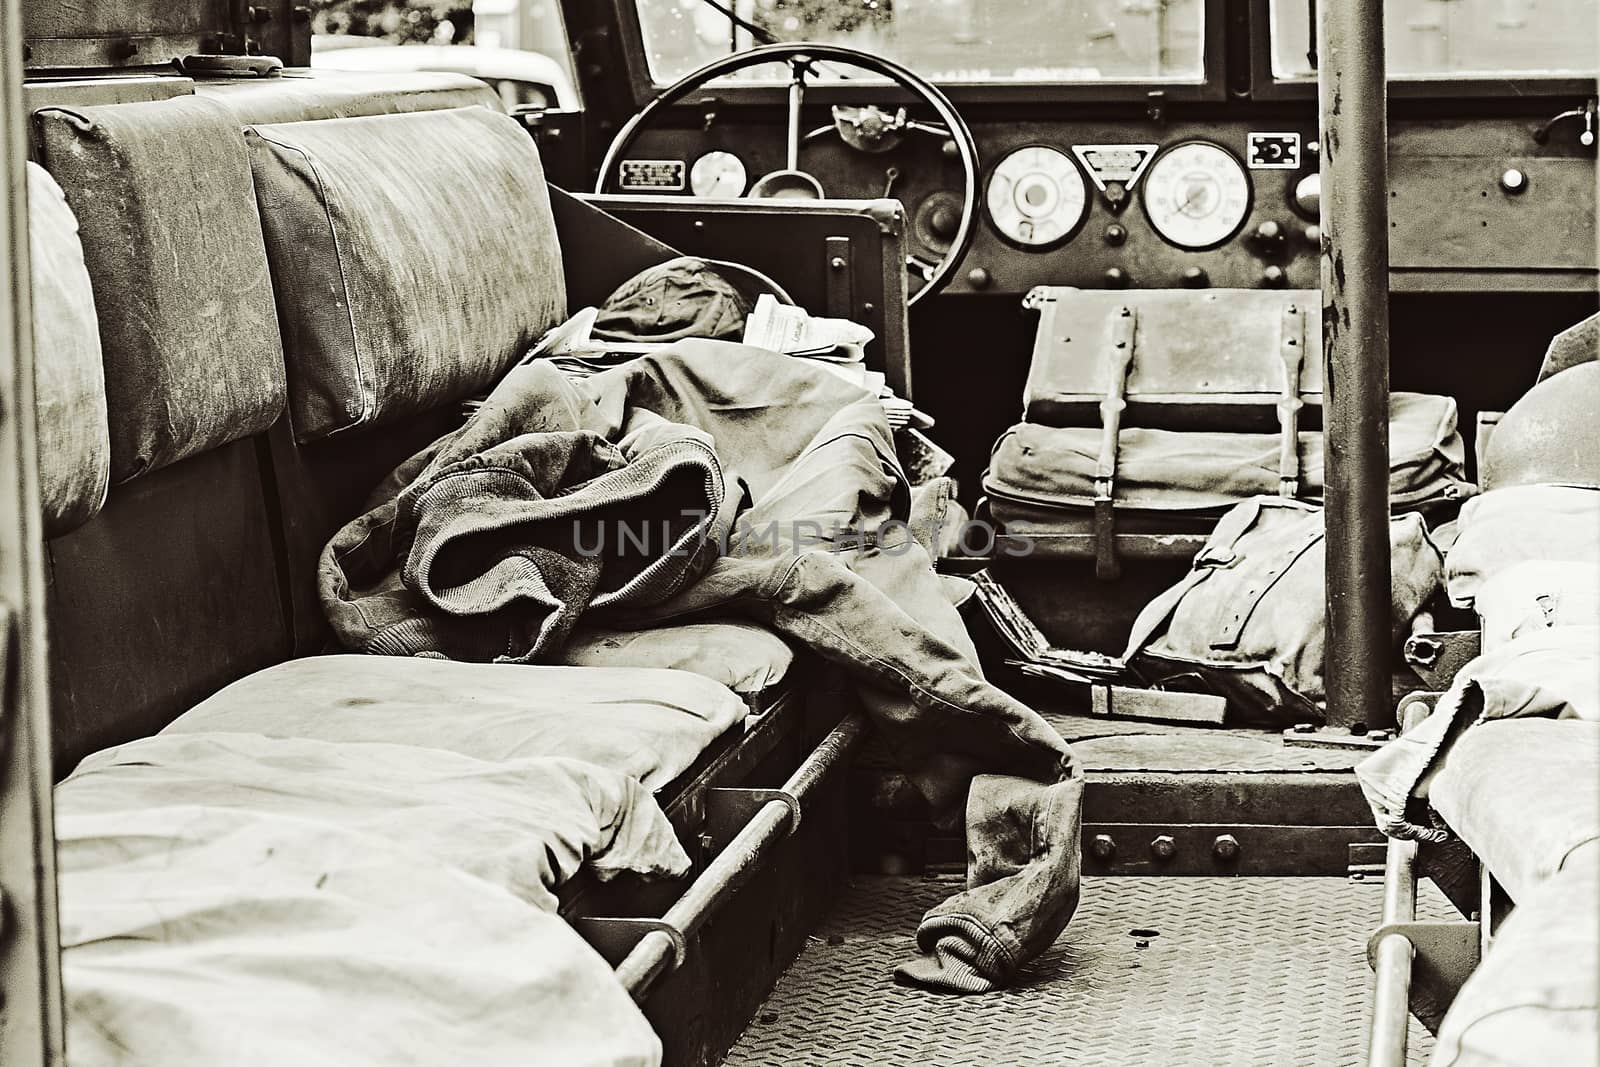 Interior of vintage wartime troop carrier - B&W by mrs_vision